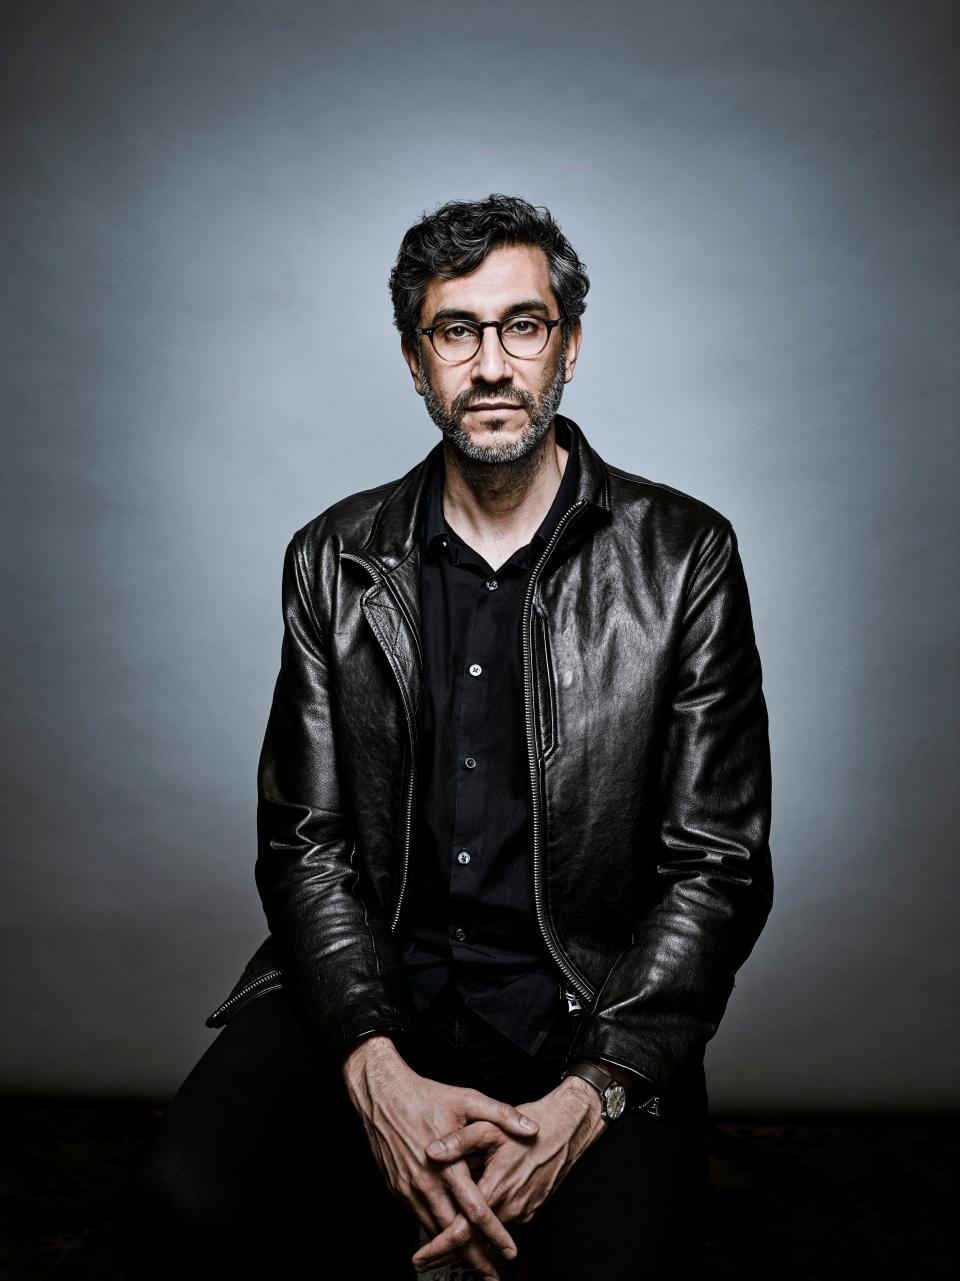 Oscar nominee Ramin Bahrani (“The White Tiger,” “Chop Shop”) will receive a documentary storytelling award and his “2nd Chance” will screen at the Nantucket Film Festival.